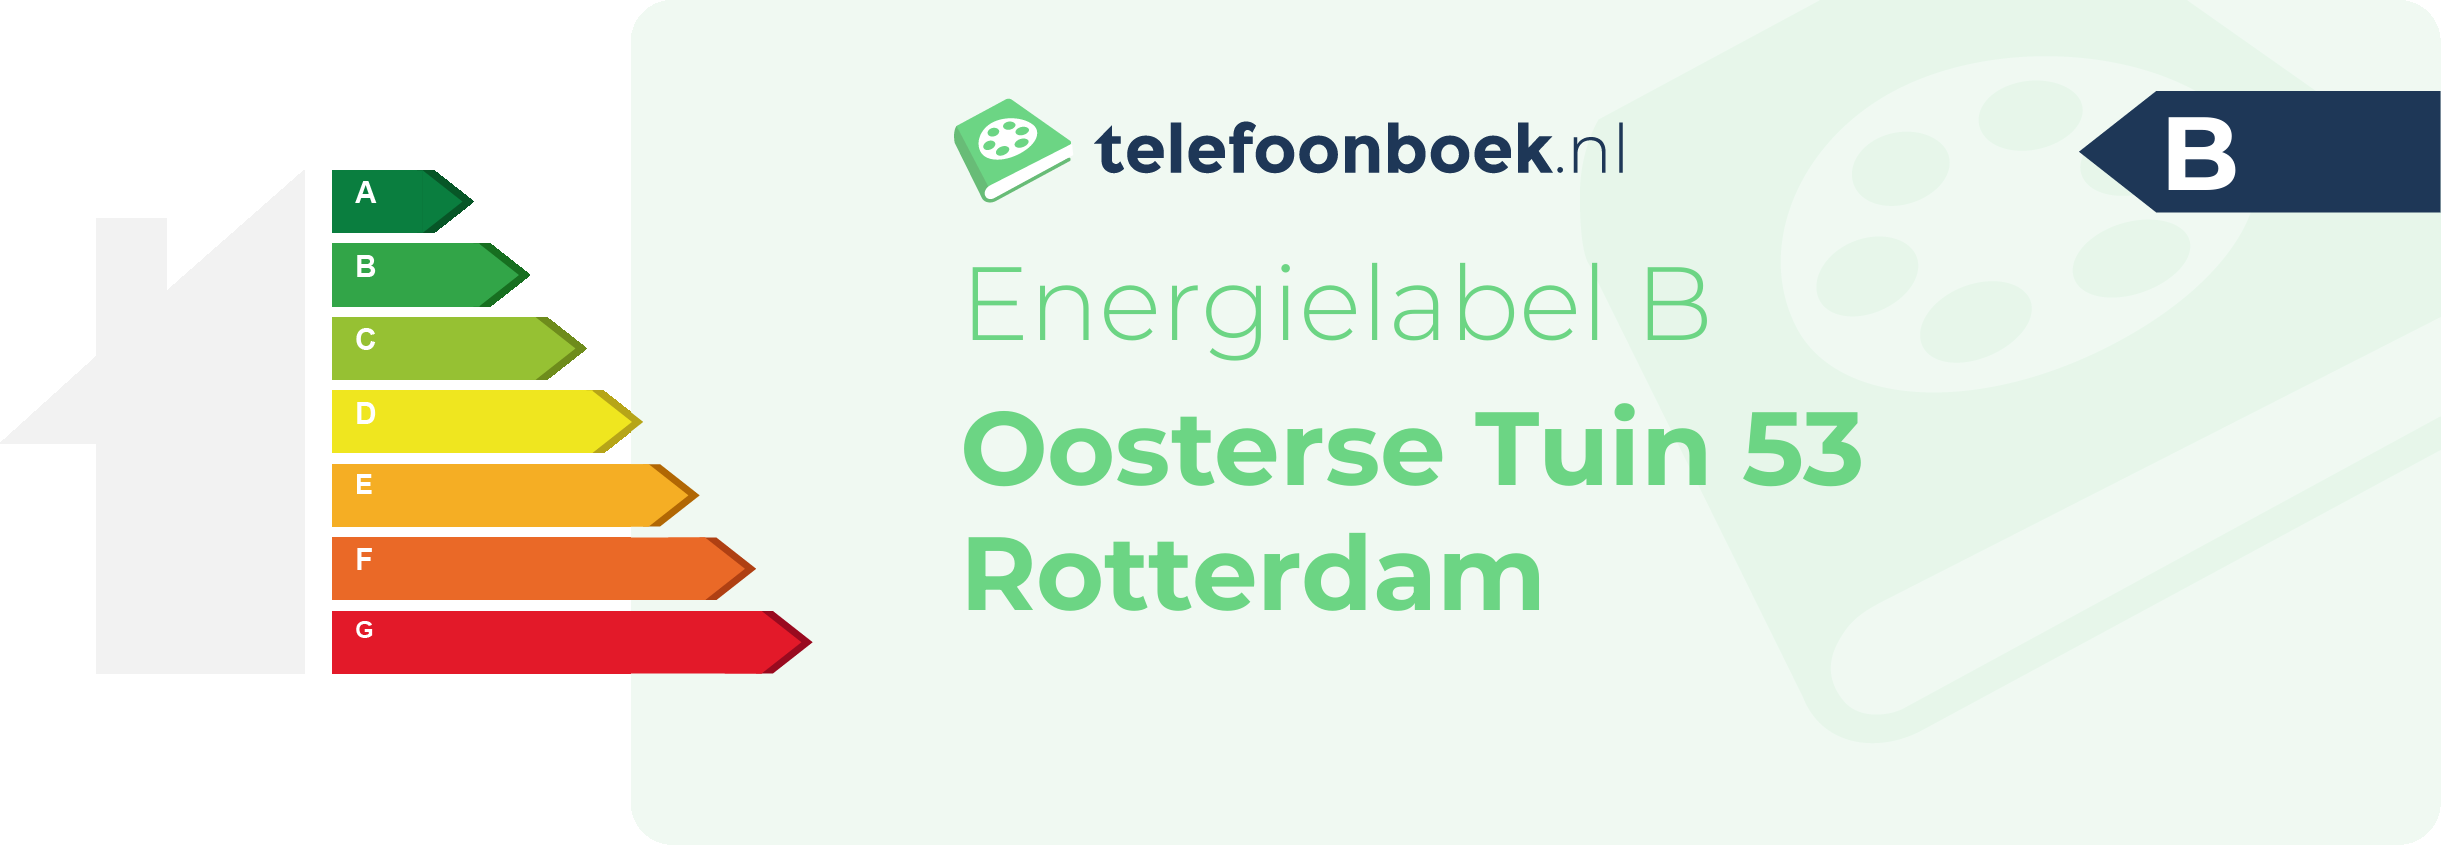 Energielabel Oosterse Tuin 53 Rotterdam